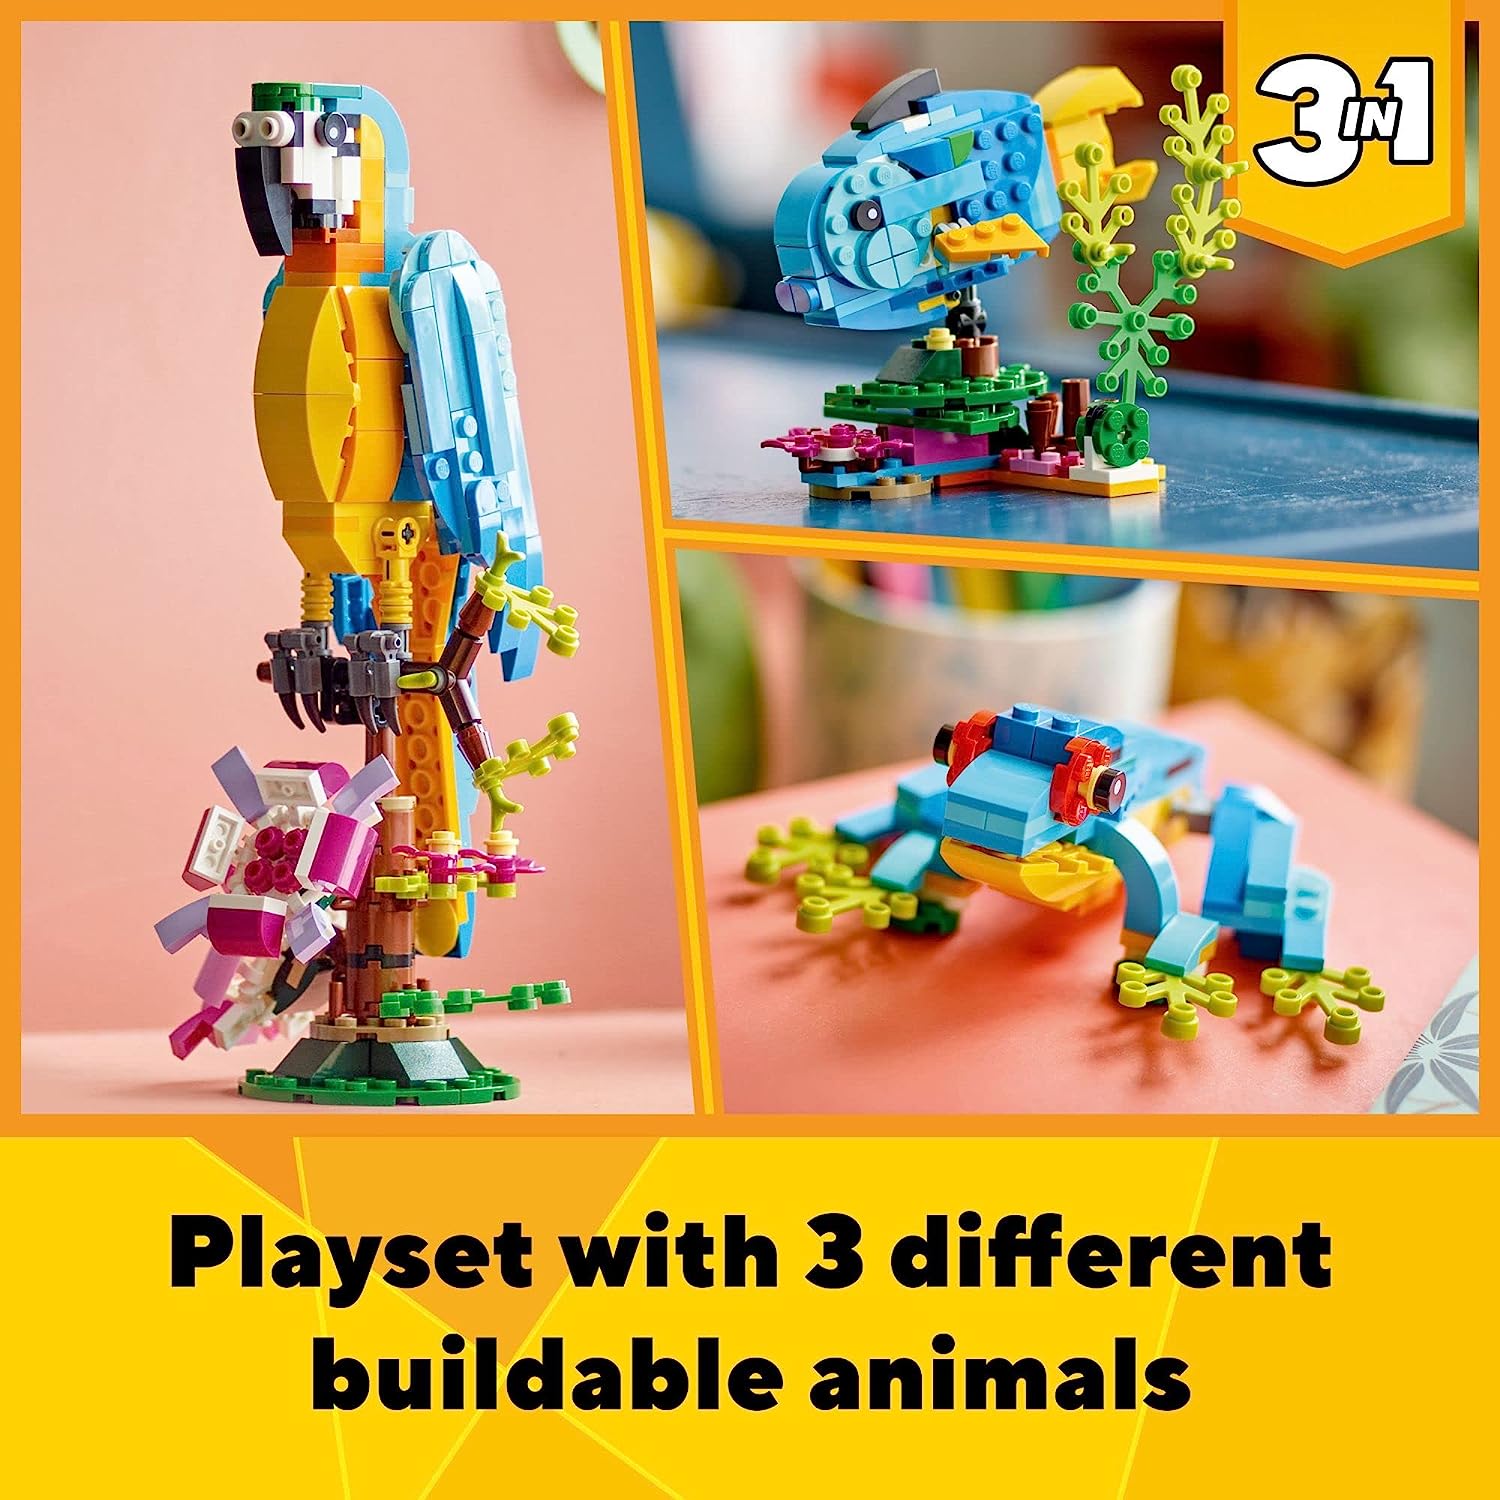 LEGO Creator 3In1 Exotic Parrot Building Kit for Ages 7+